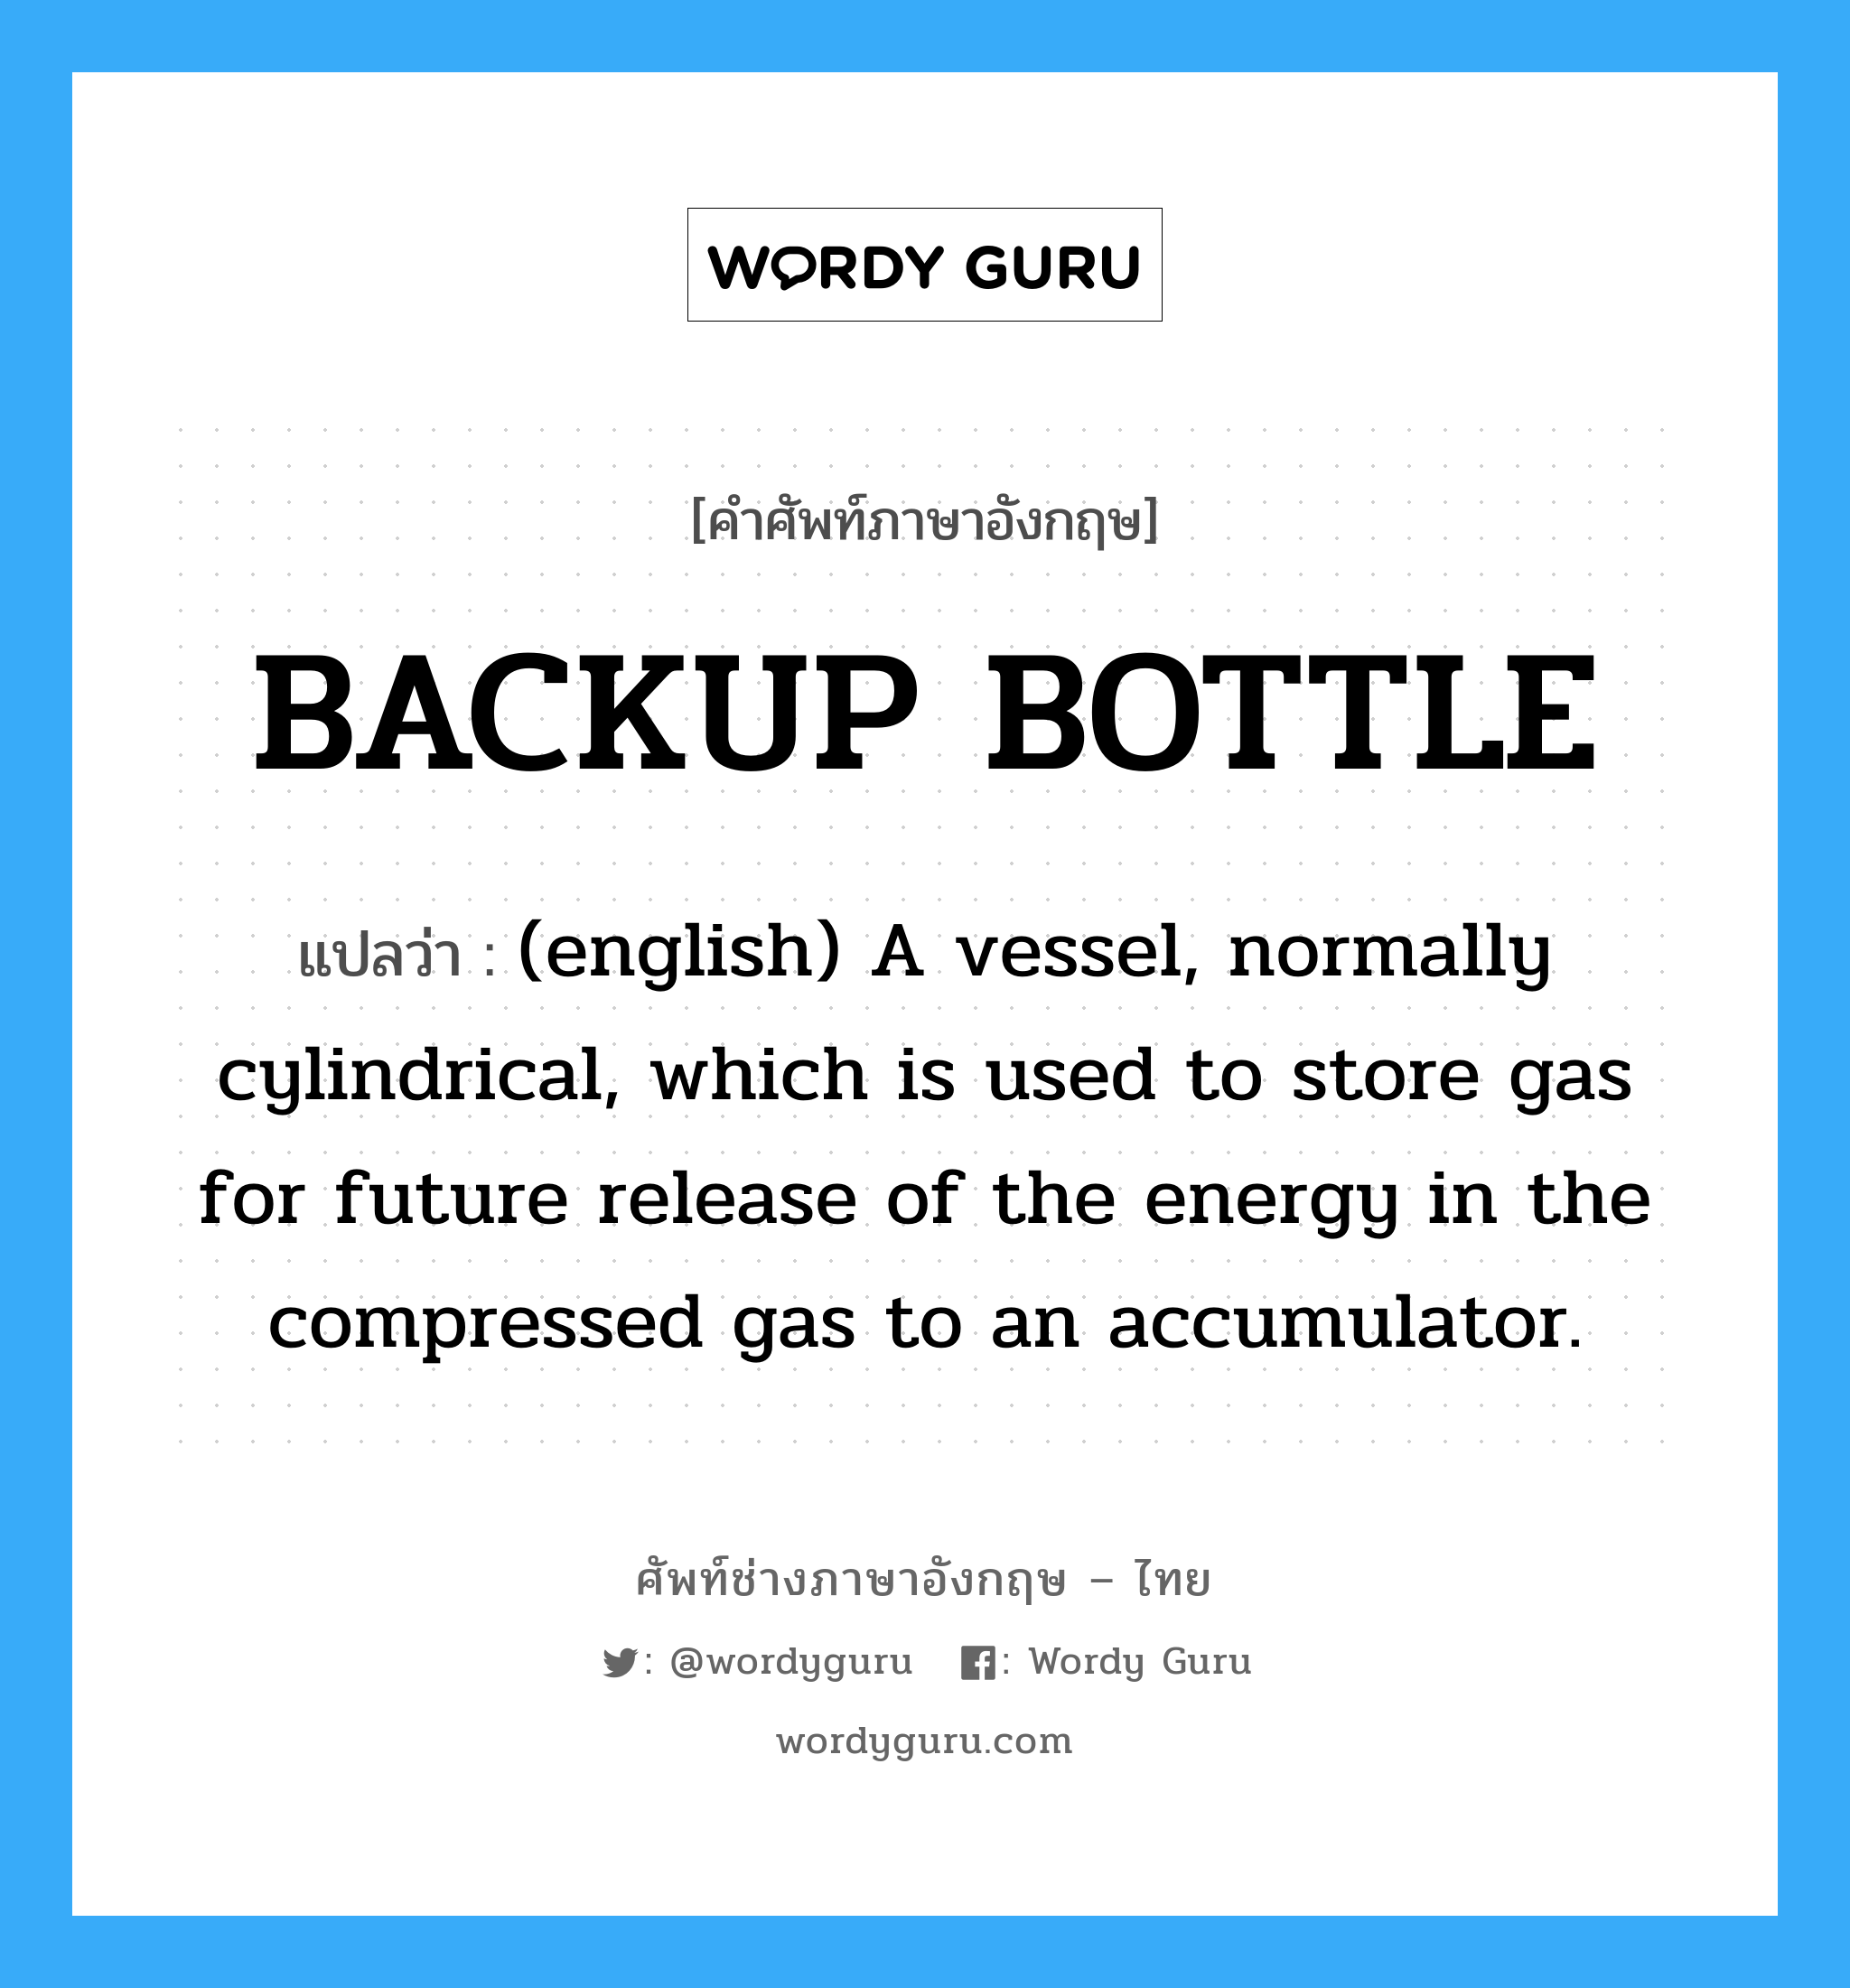 BACKUP BOTTLE แปลว่า?, คำศัพท์ช่างภาษาอังกฤษ - ไทย BACKUP BOTTLE คำศัพท์ภาษาอังกฤษ BACKUP BOTTLE แปลว่า (english) A vessel, normally cylindrical, which is used to store gas for future release of the energy in the compressed gas to an accumulator.